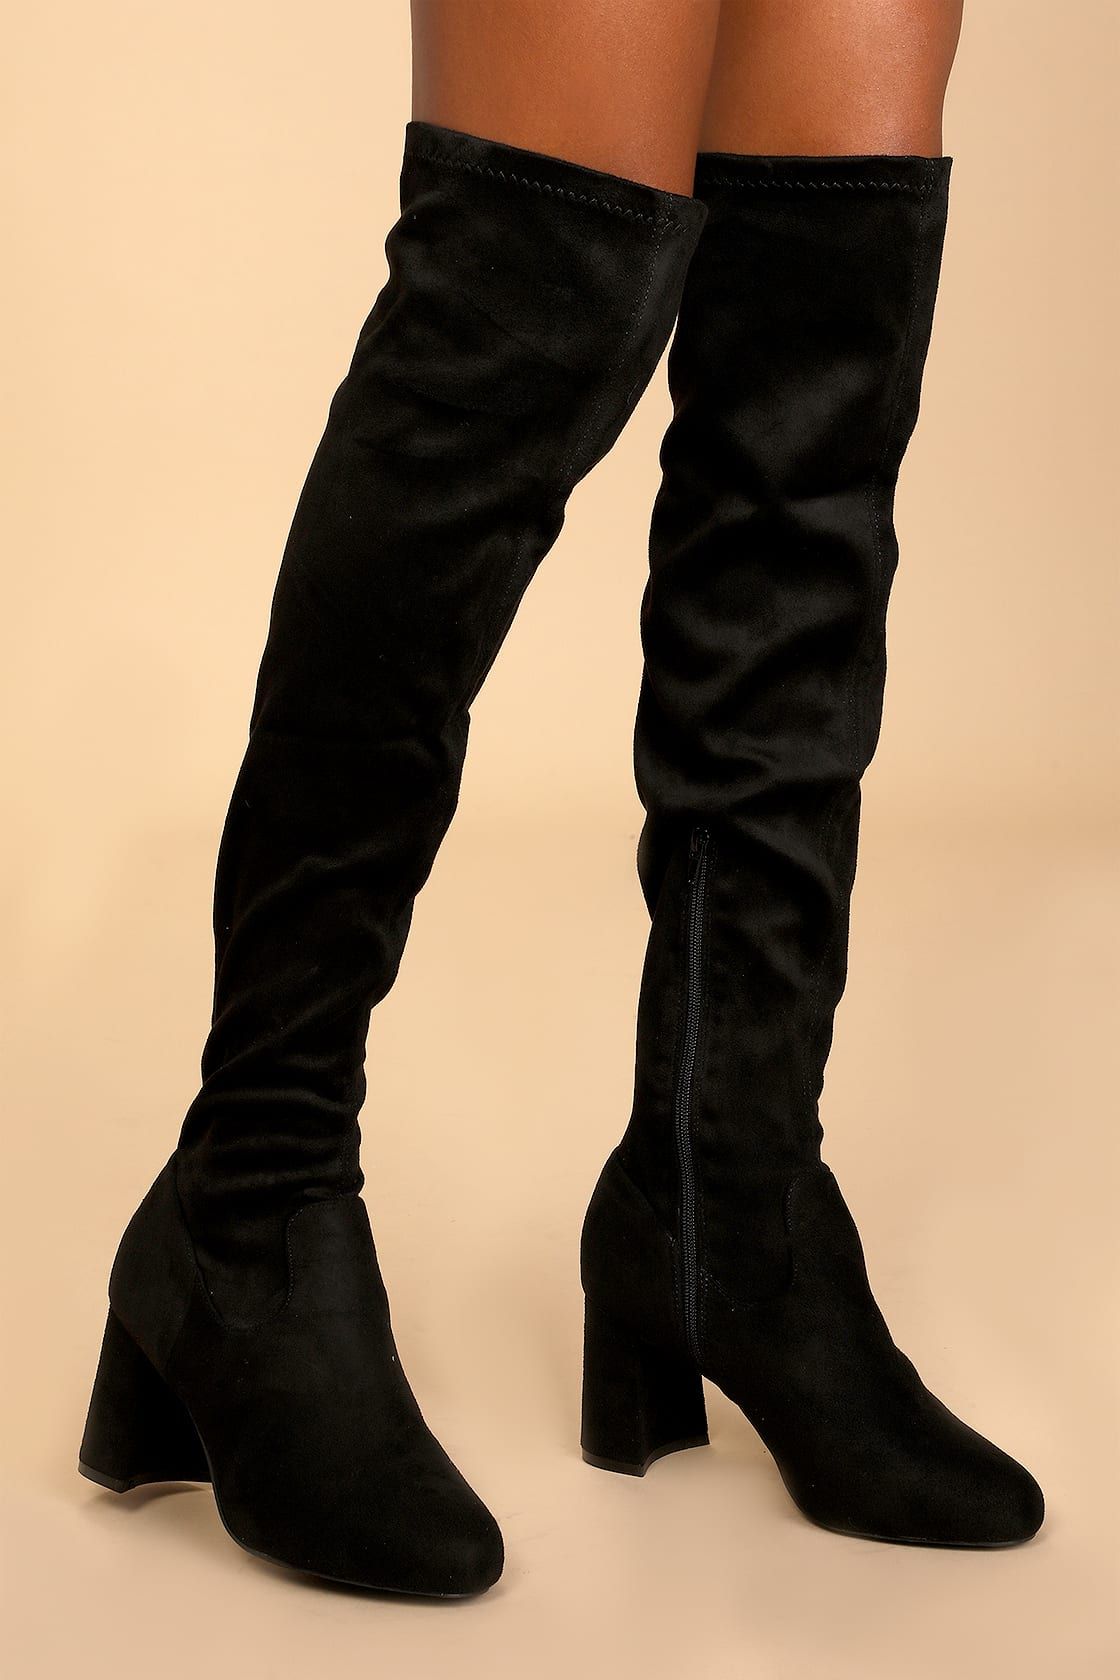 Tahlia Black Suede Over the Knee Boots | Lulus (US)